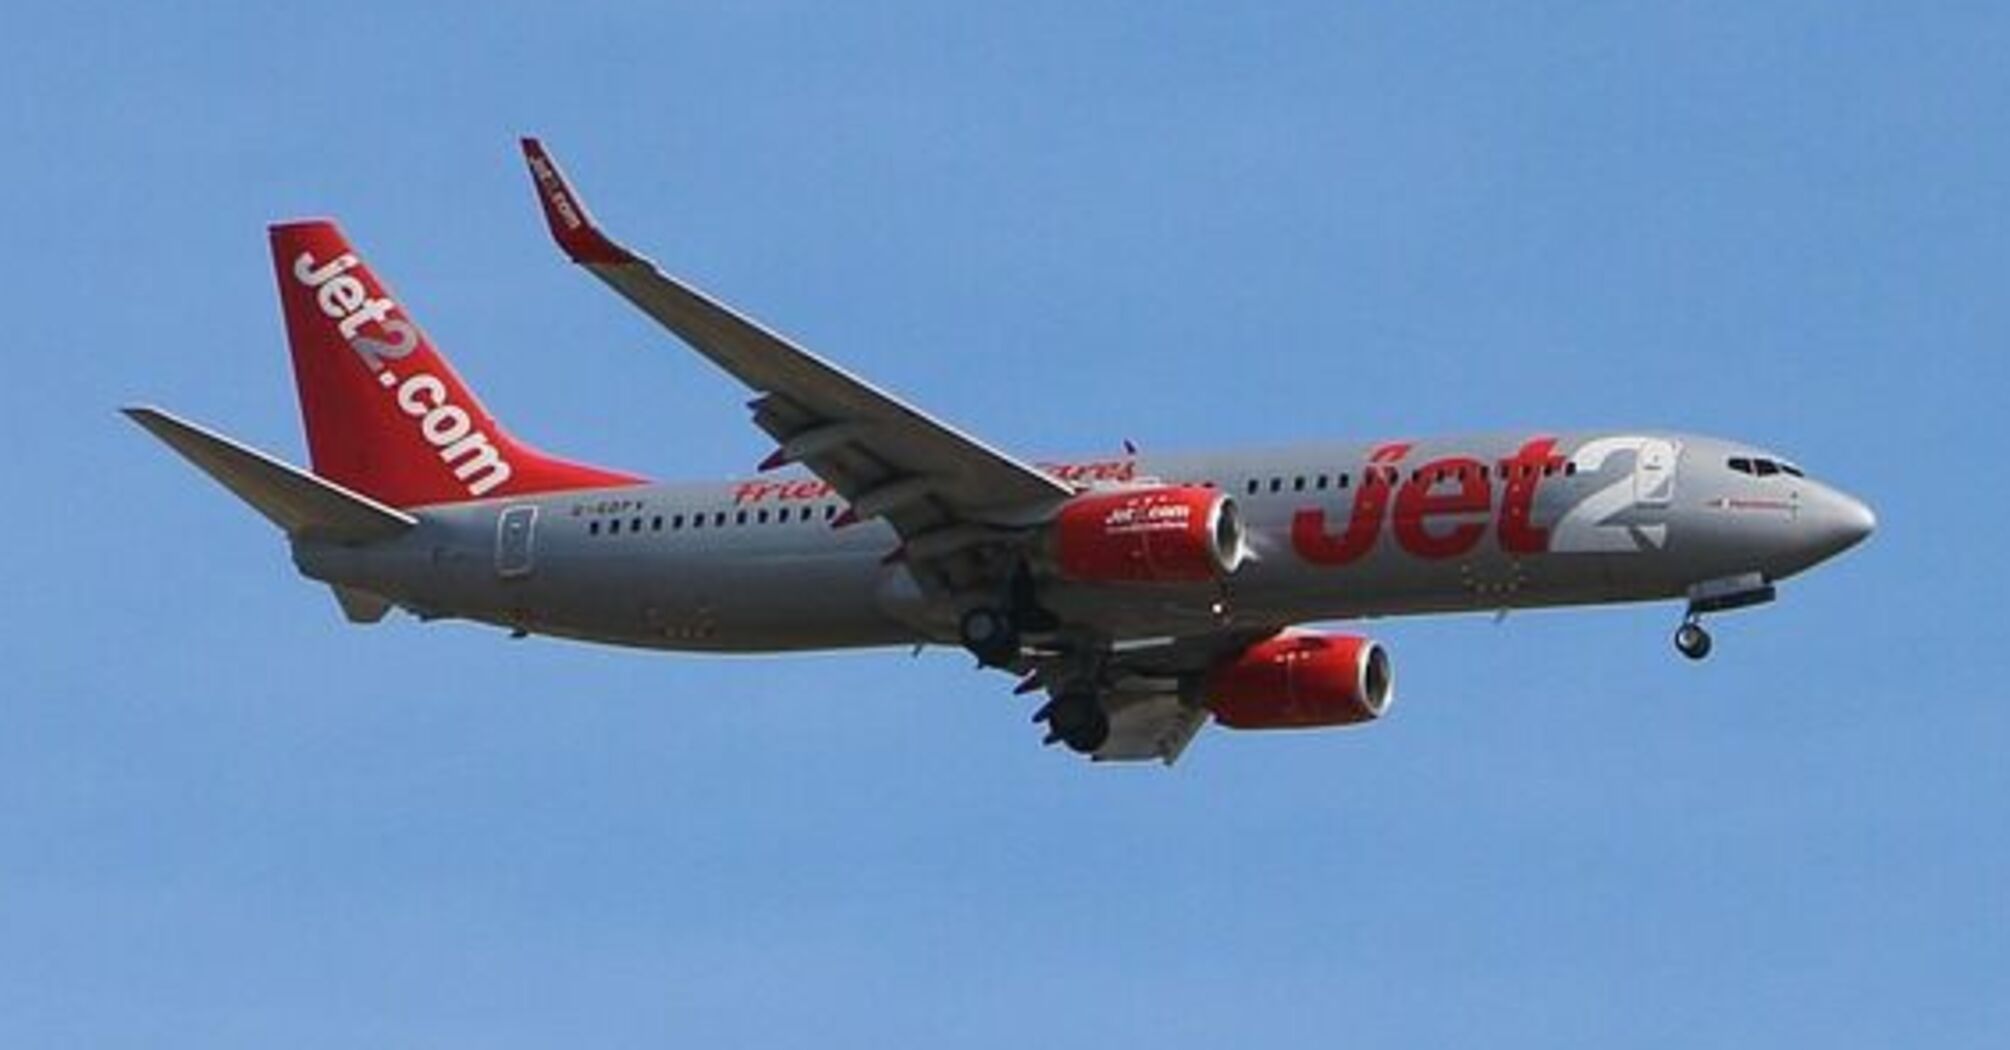 Jet2 has warned passengers of possible flight disruptions due to severe weather